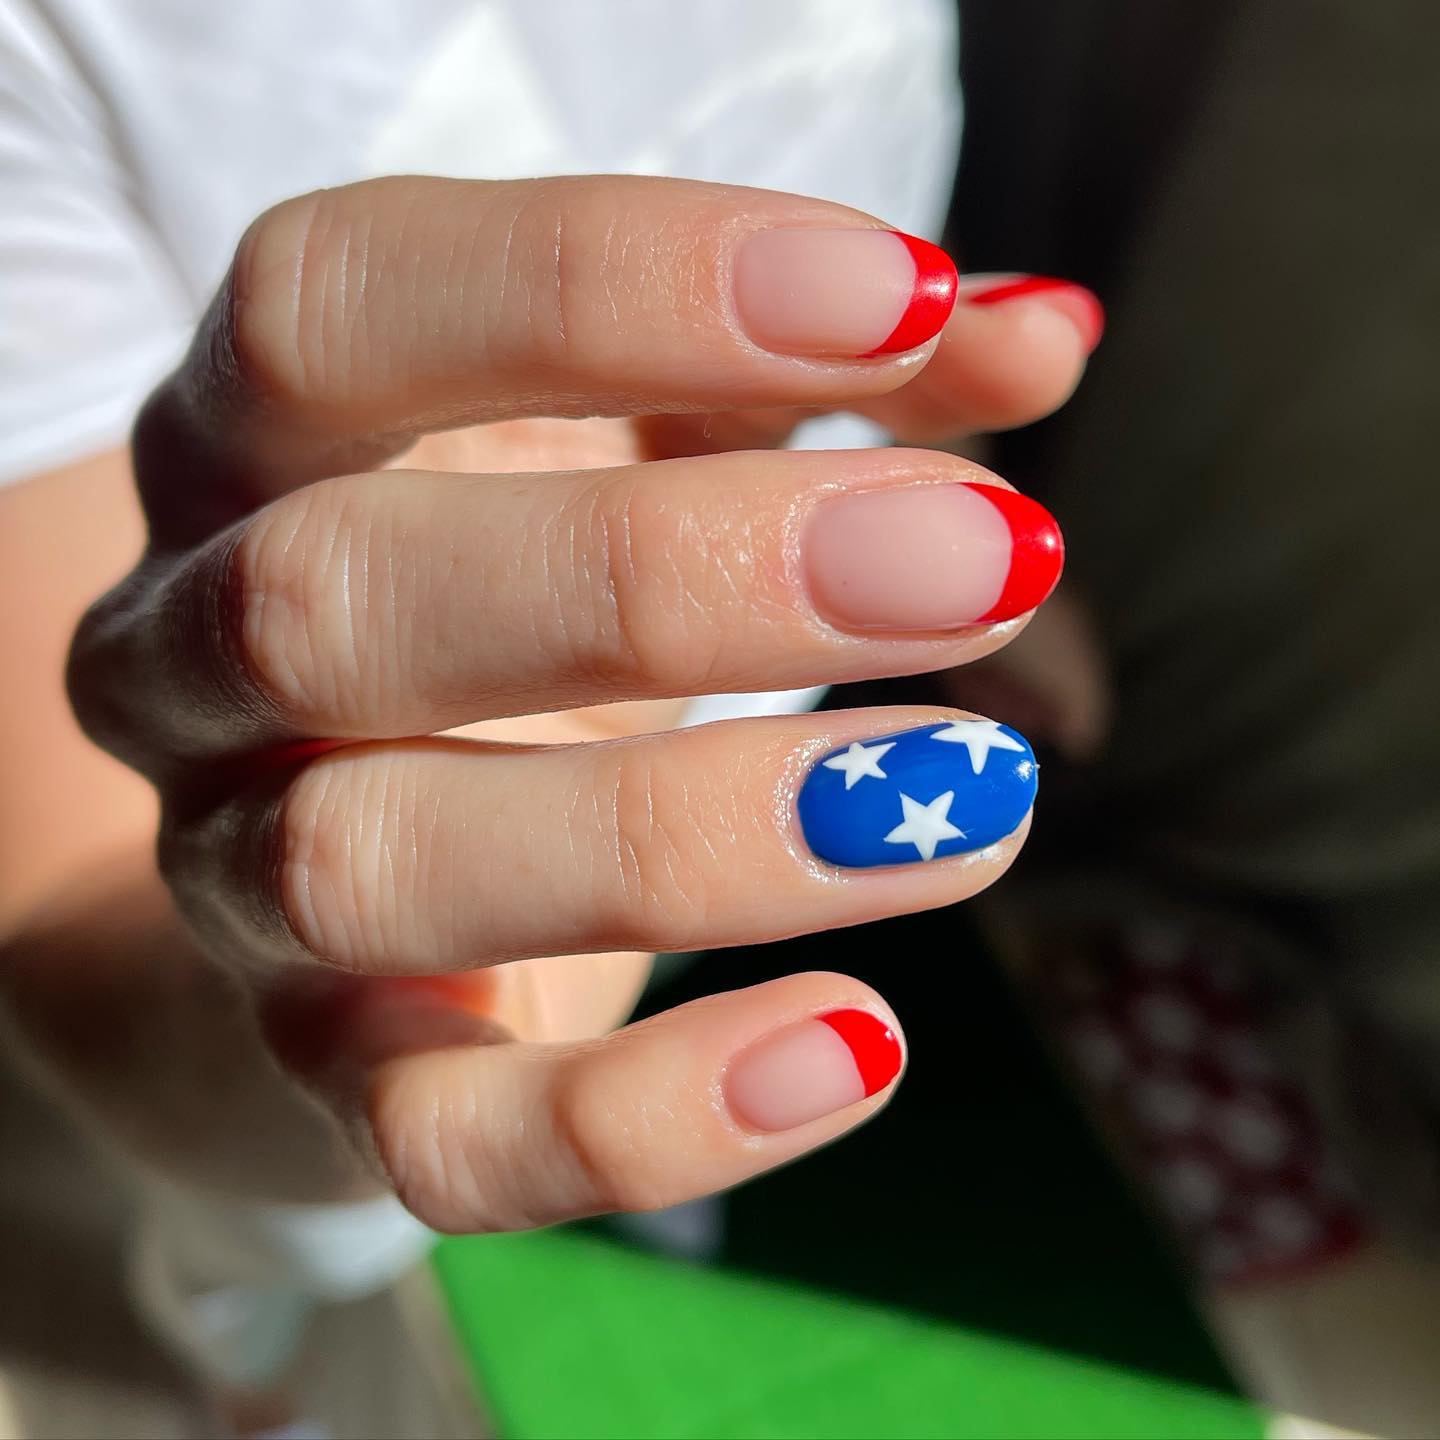 Red White And Blue French Tip Nails with white stars like USA flag